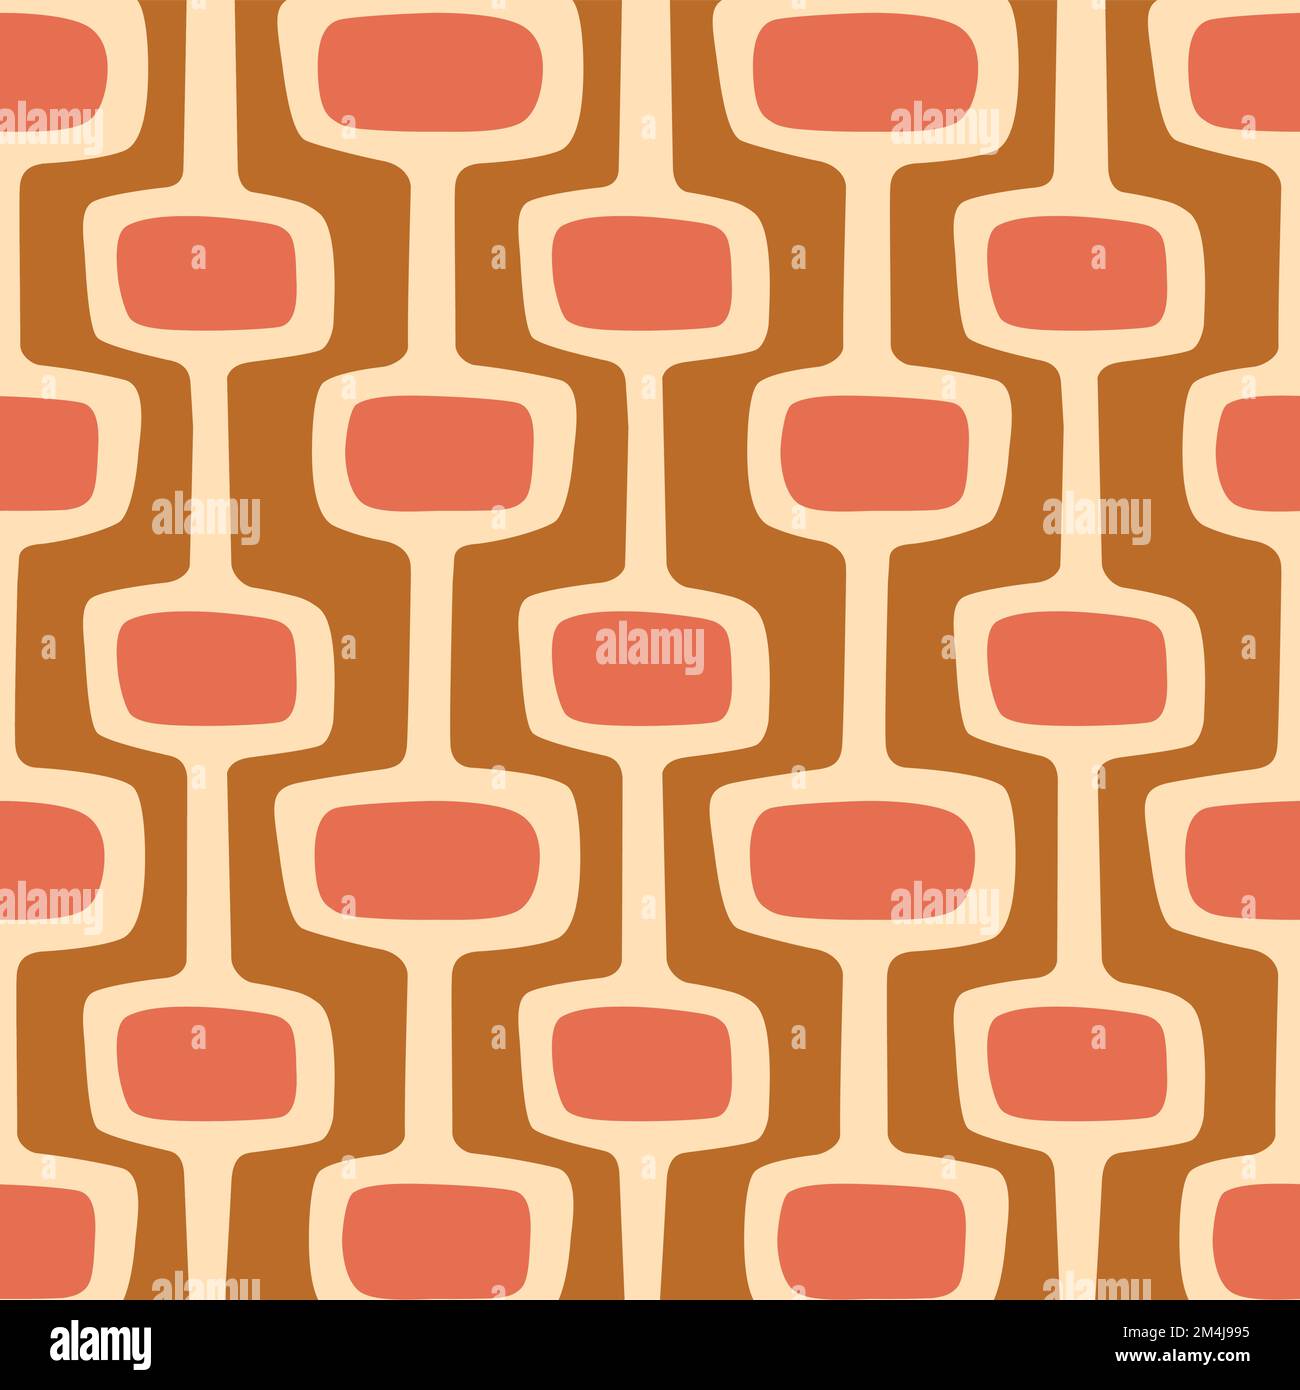 Mid-century modern atomic age background in Orange, cream, and mustard gold. Ideal for wallpaper and fabric design. Stock Vector